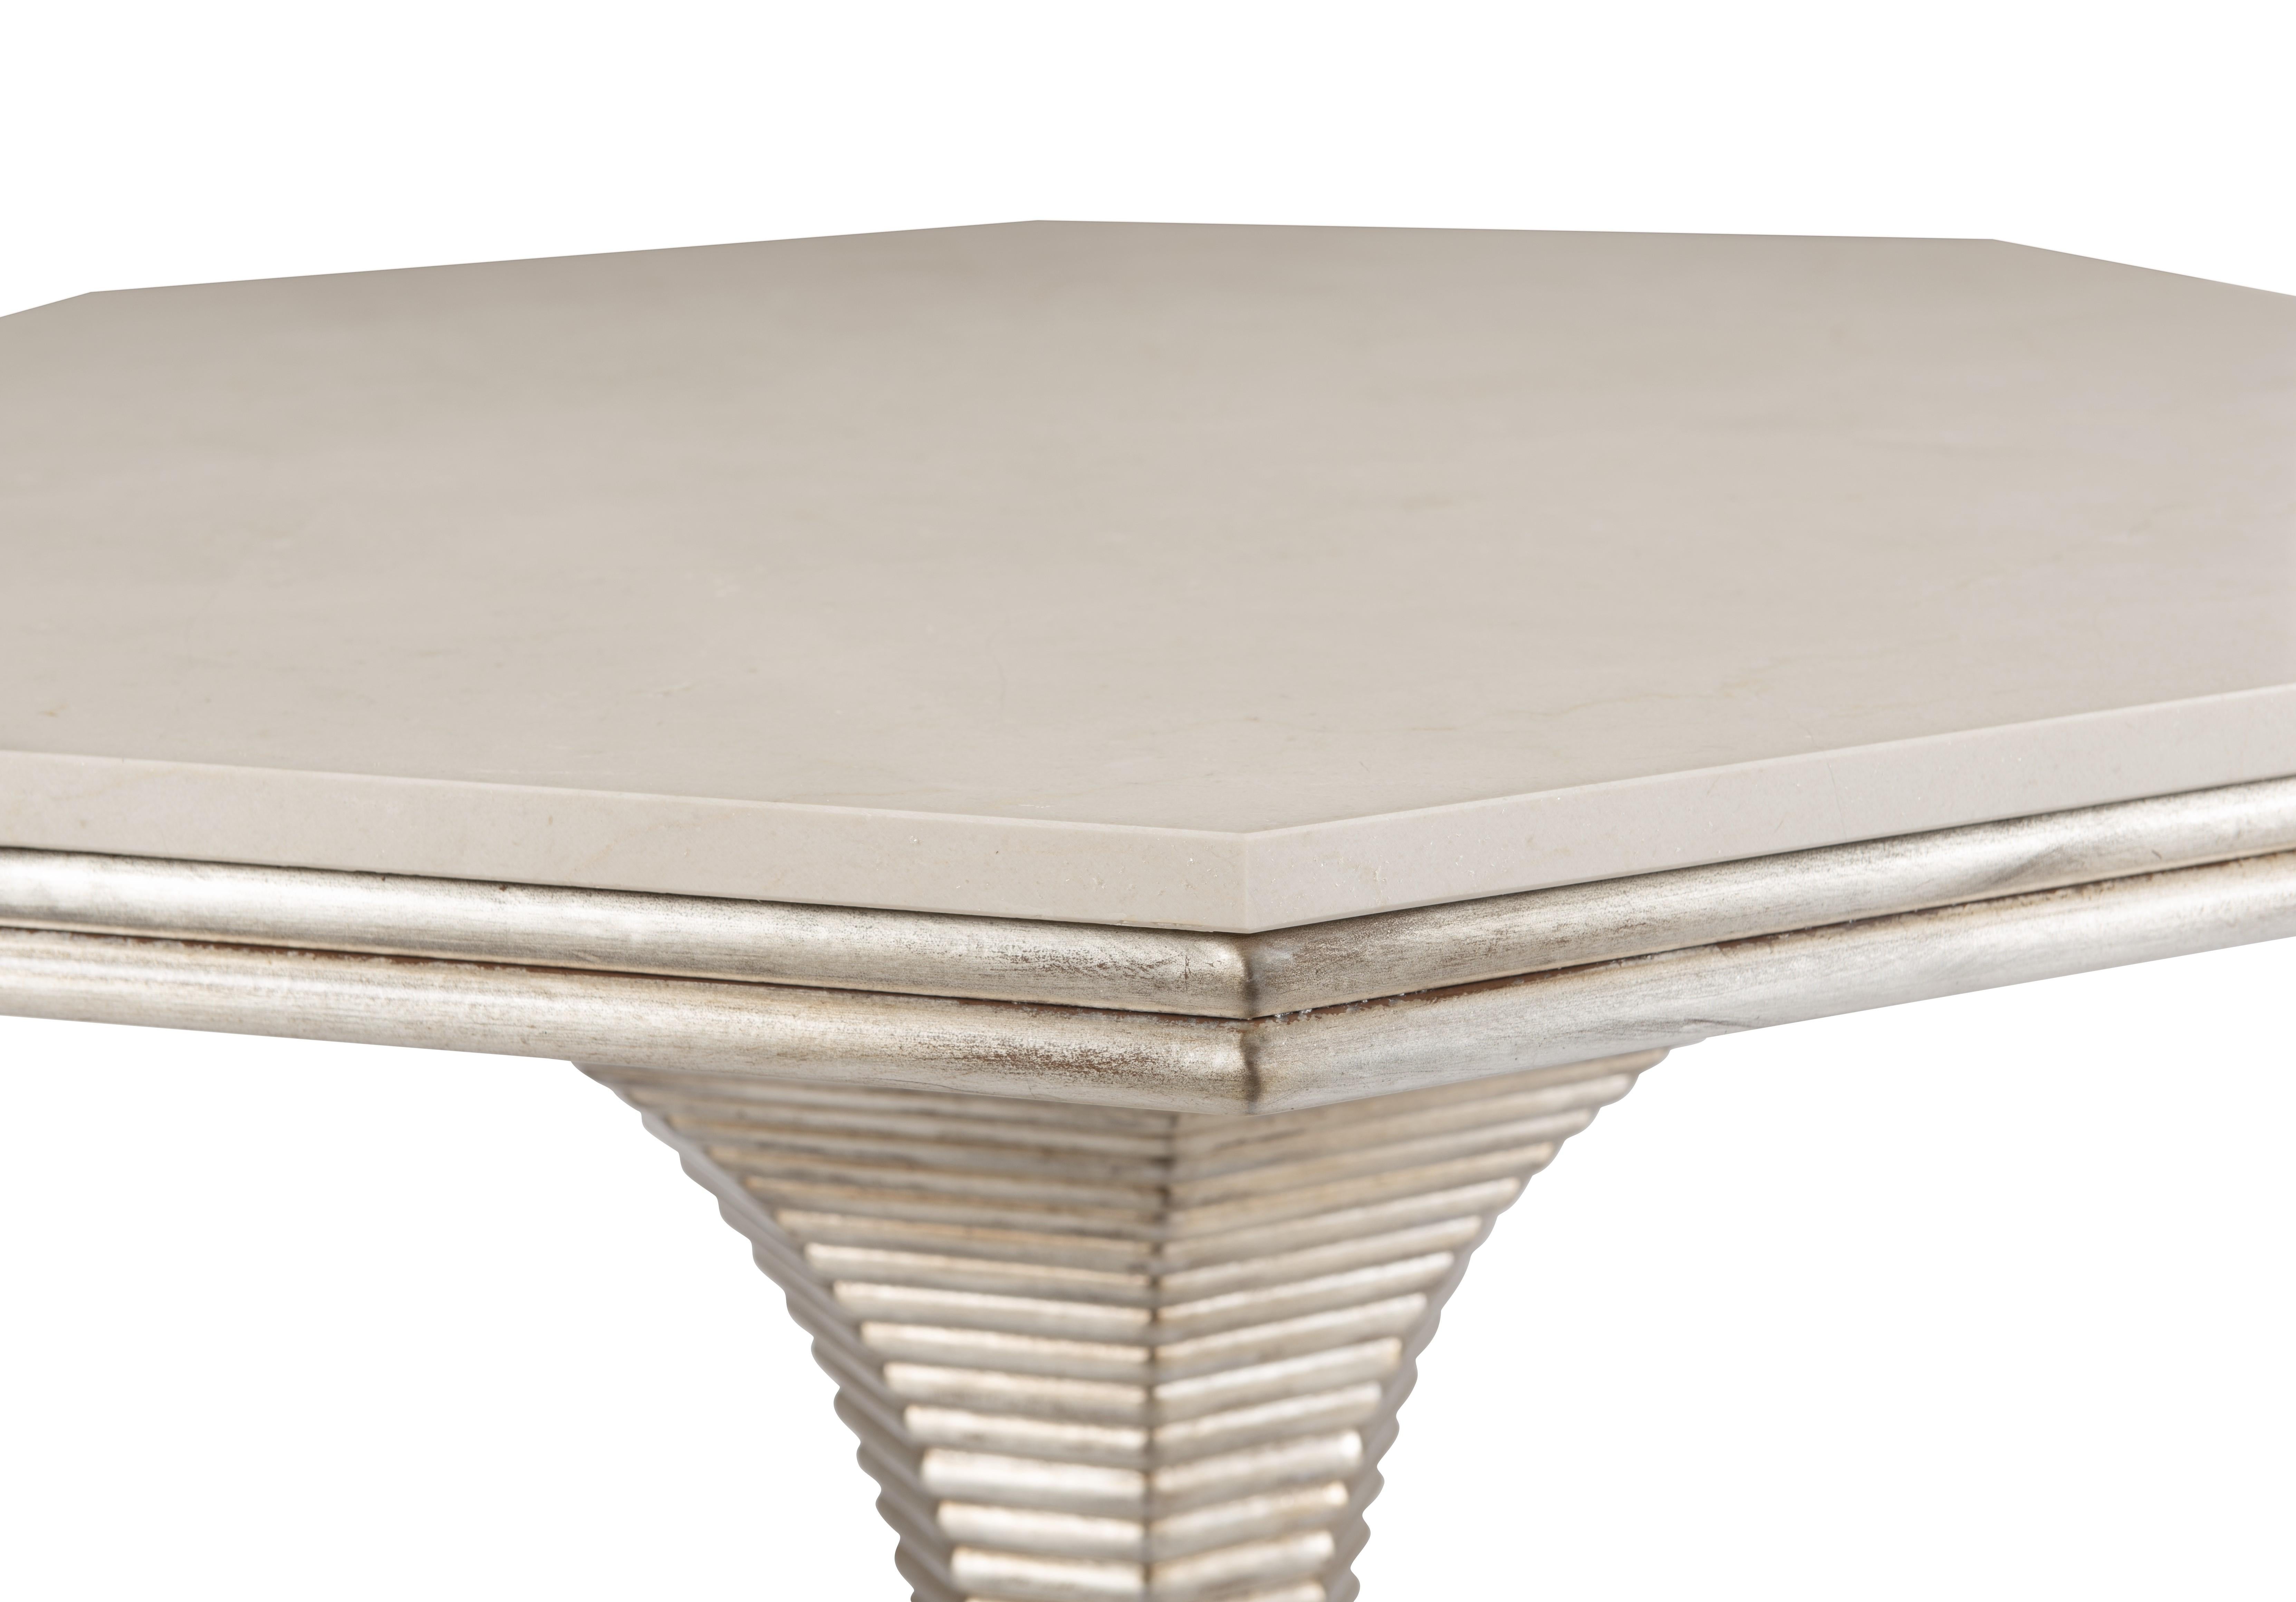 The Hourglass Table’s stone top is crafted of Crema Marfil marble, a material with unique and handsome variations. It is well-regarded for its beautiful cream color with light brown undertones as well as for its delicate veining and unique